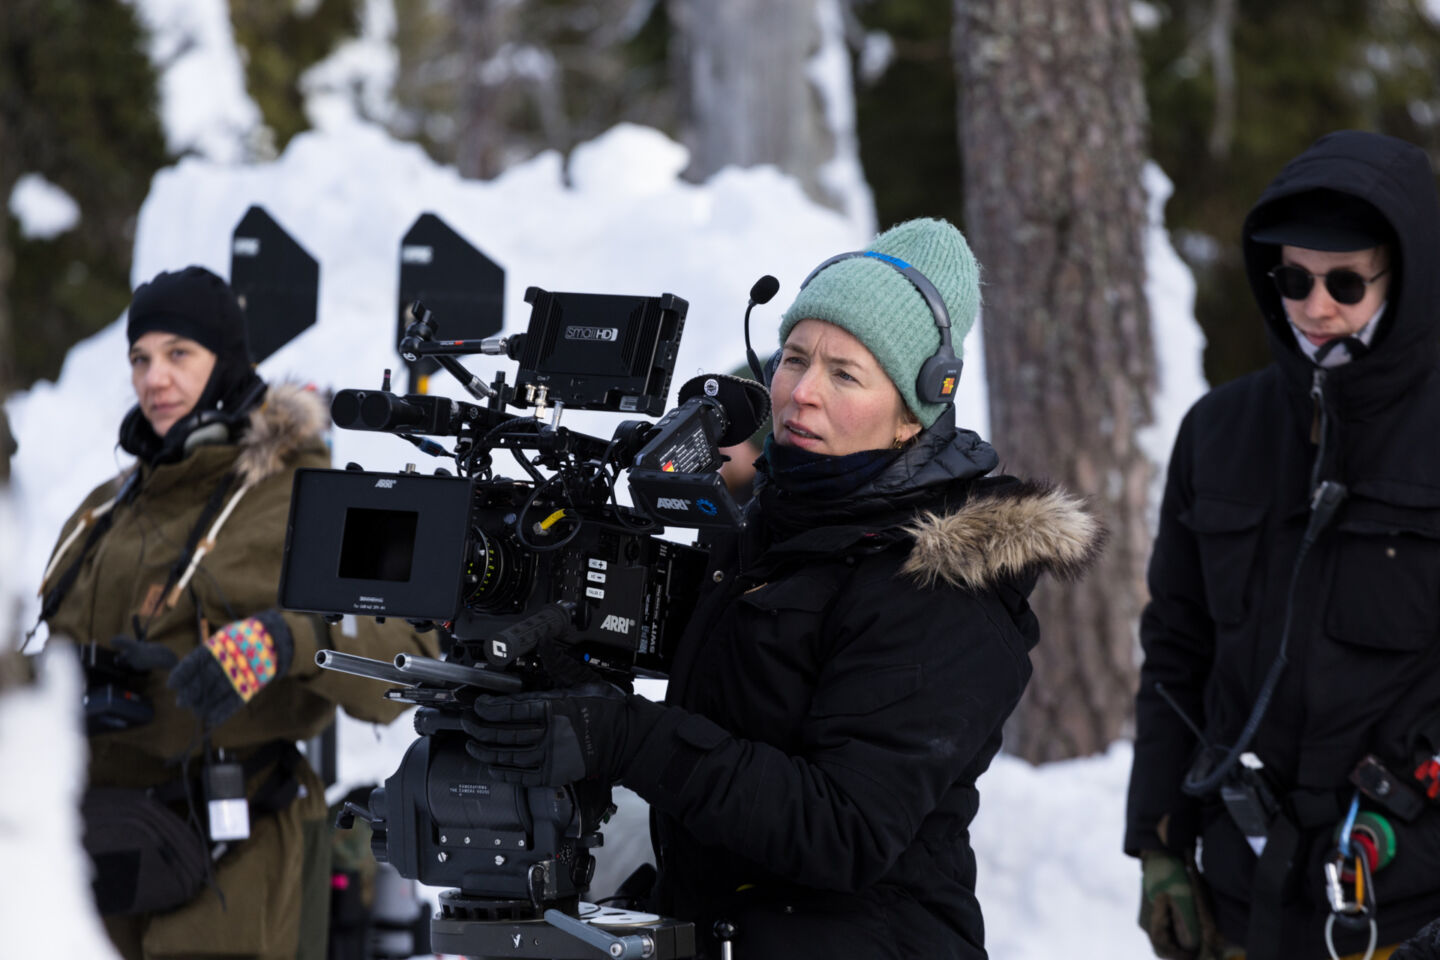 Behind the scenes of mini-series Critical Point (Kriittinen piste), filmed on location in northern Finland and Finnish Lapland